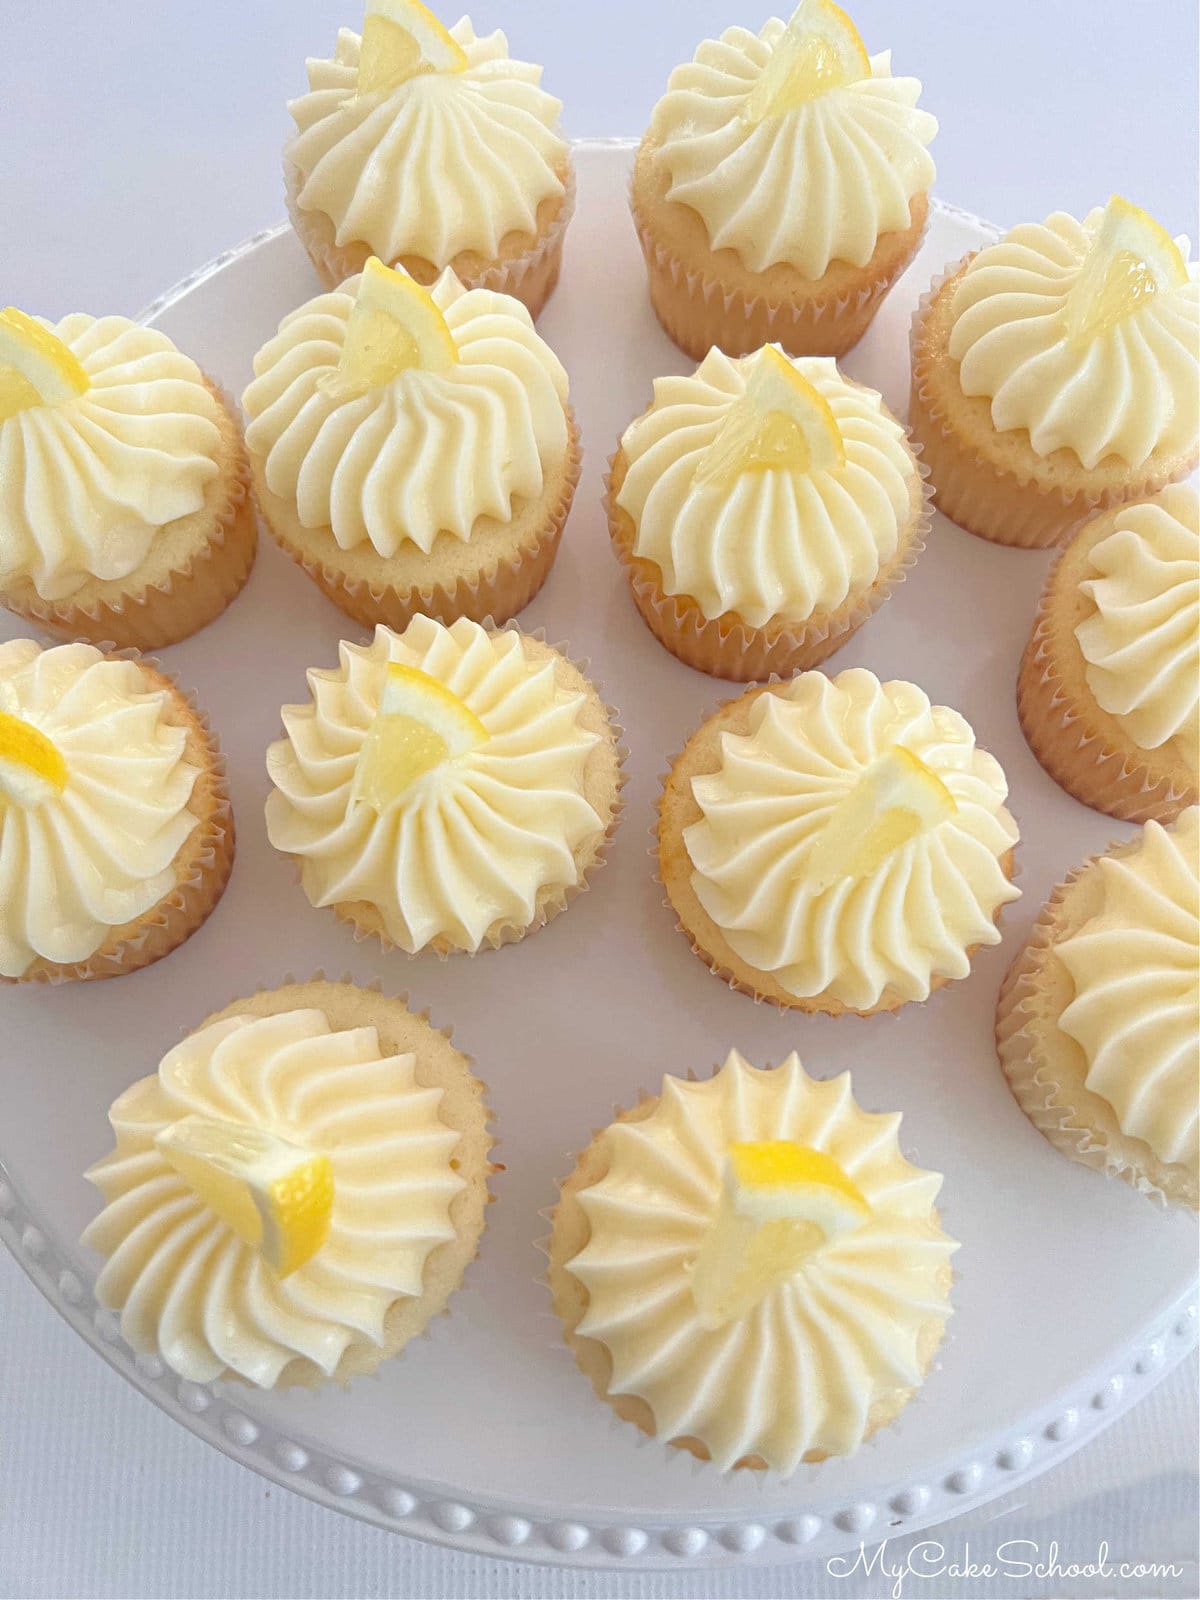 Overhead view of Lemon Cupcakes with Lemon Frosting, topped with lemon slices